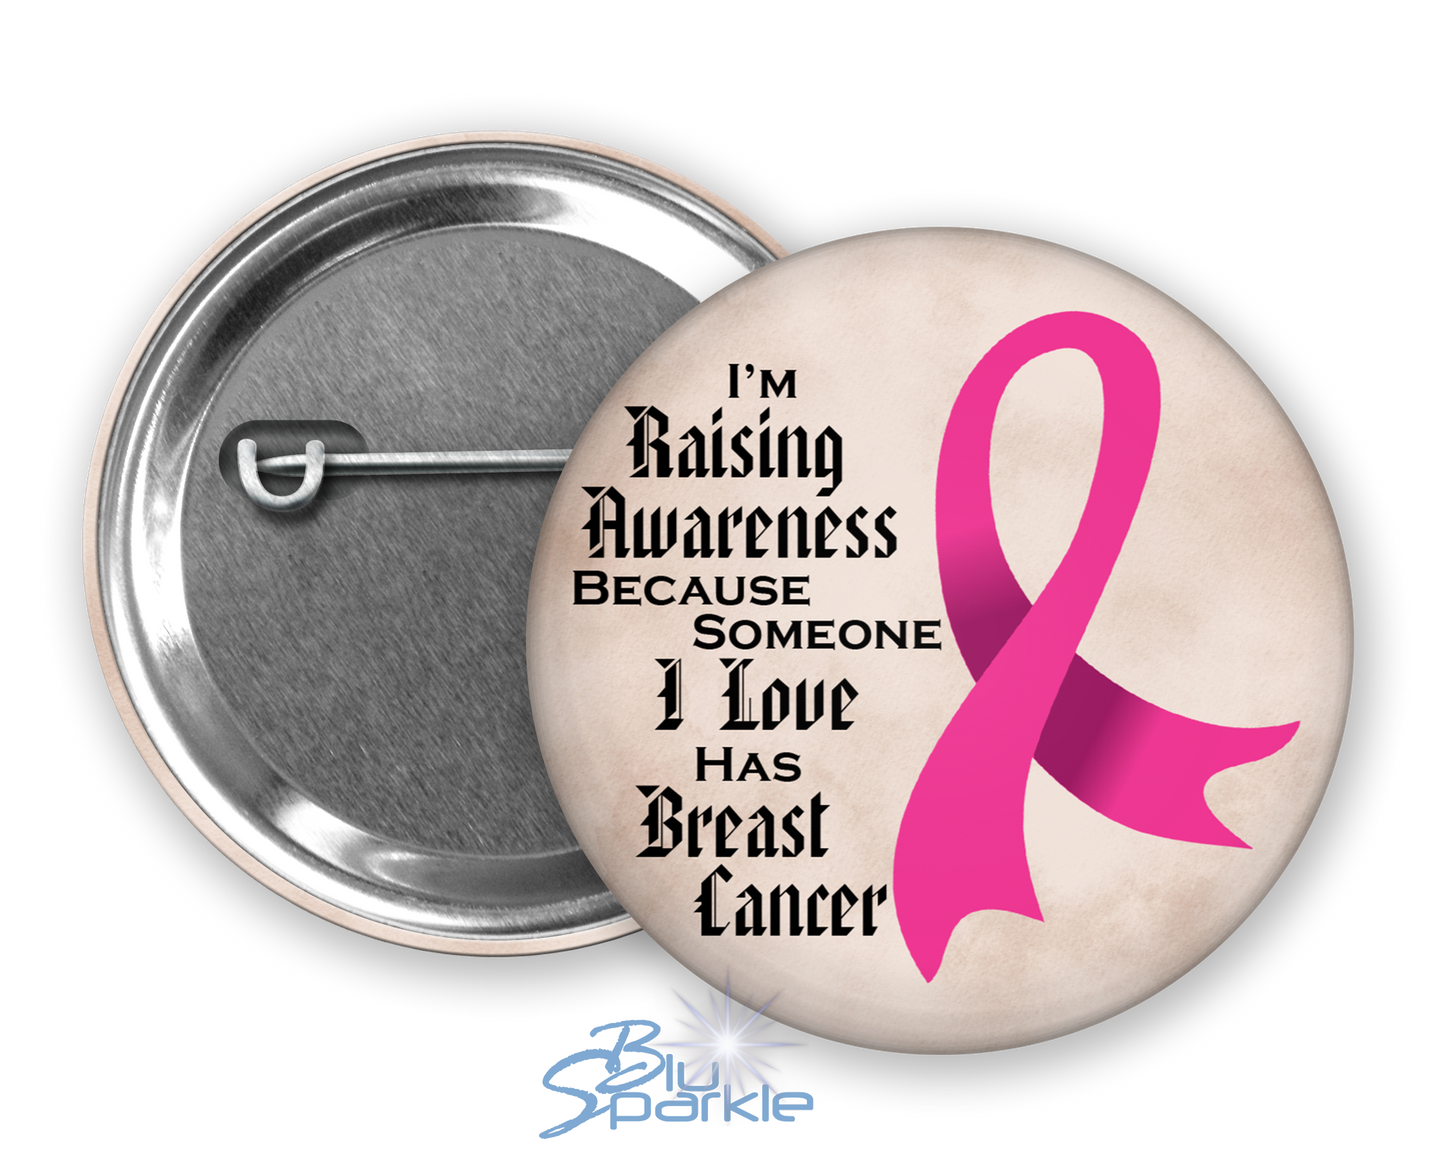 I'm Raising Awareness Because Someone I Love Died From (Has, Survived) Breast Cancer Pinback Button